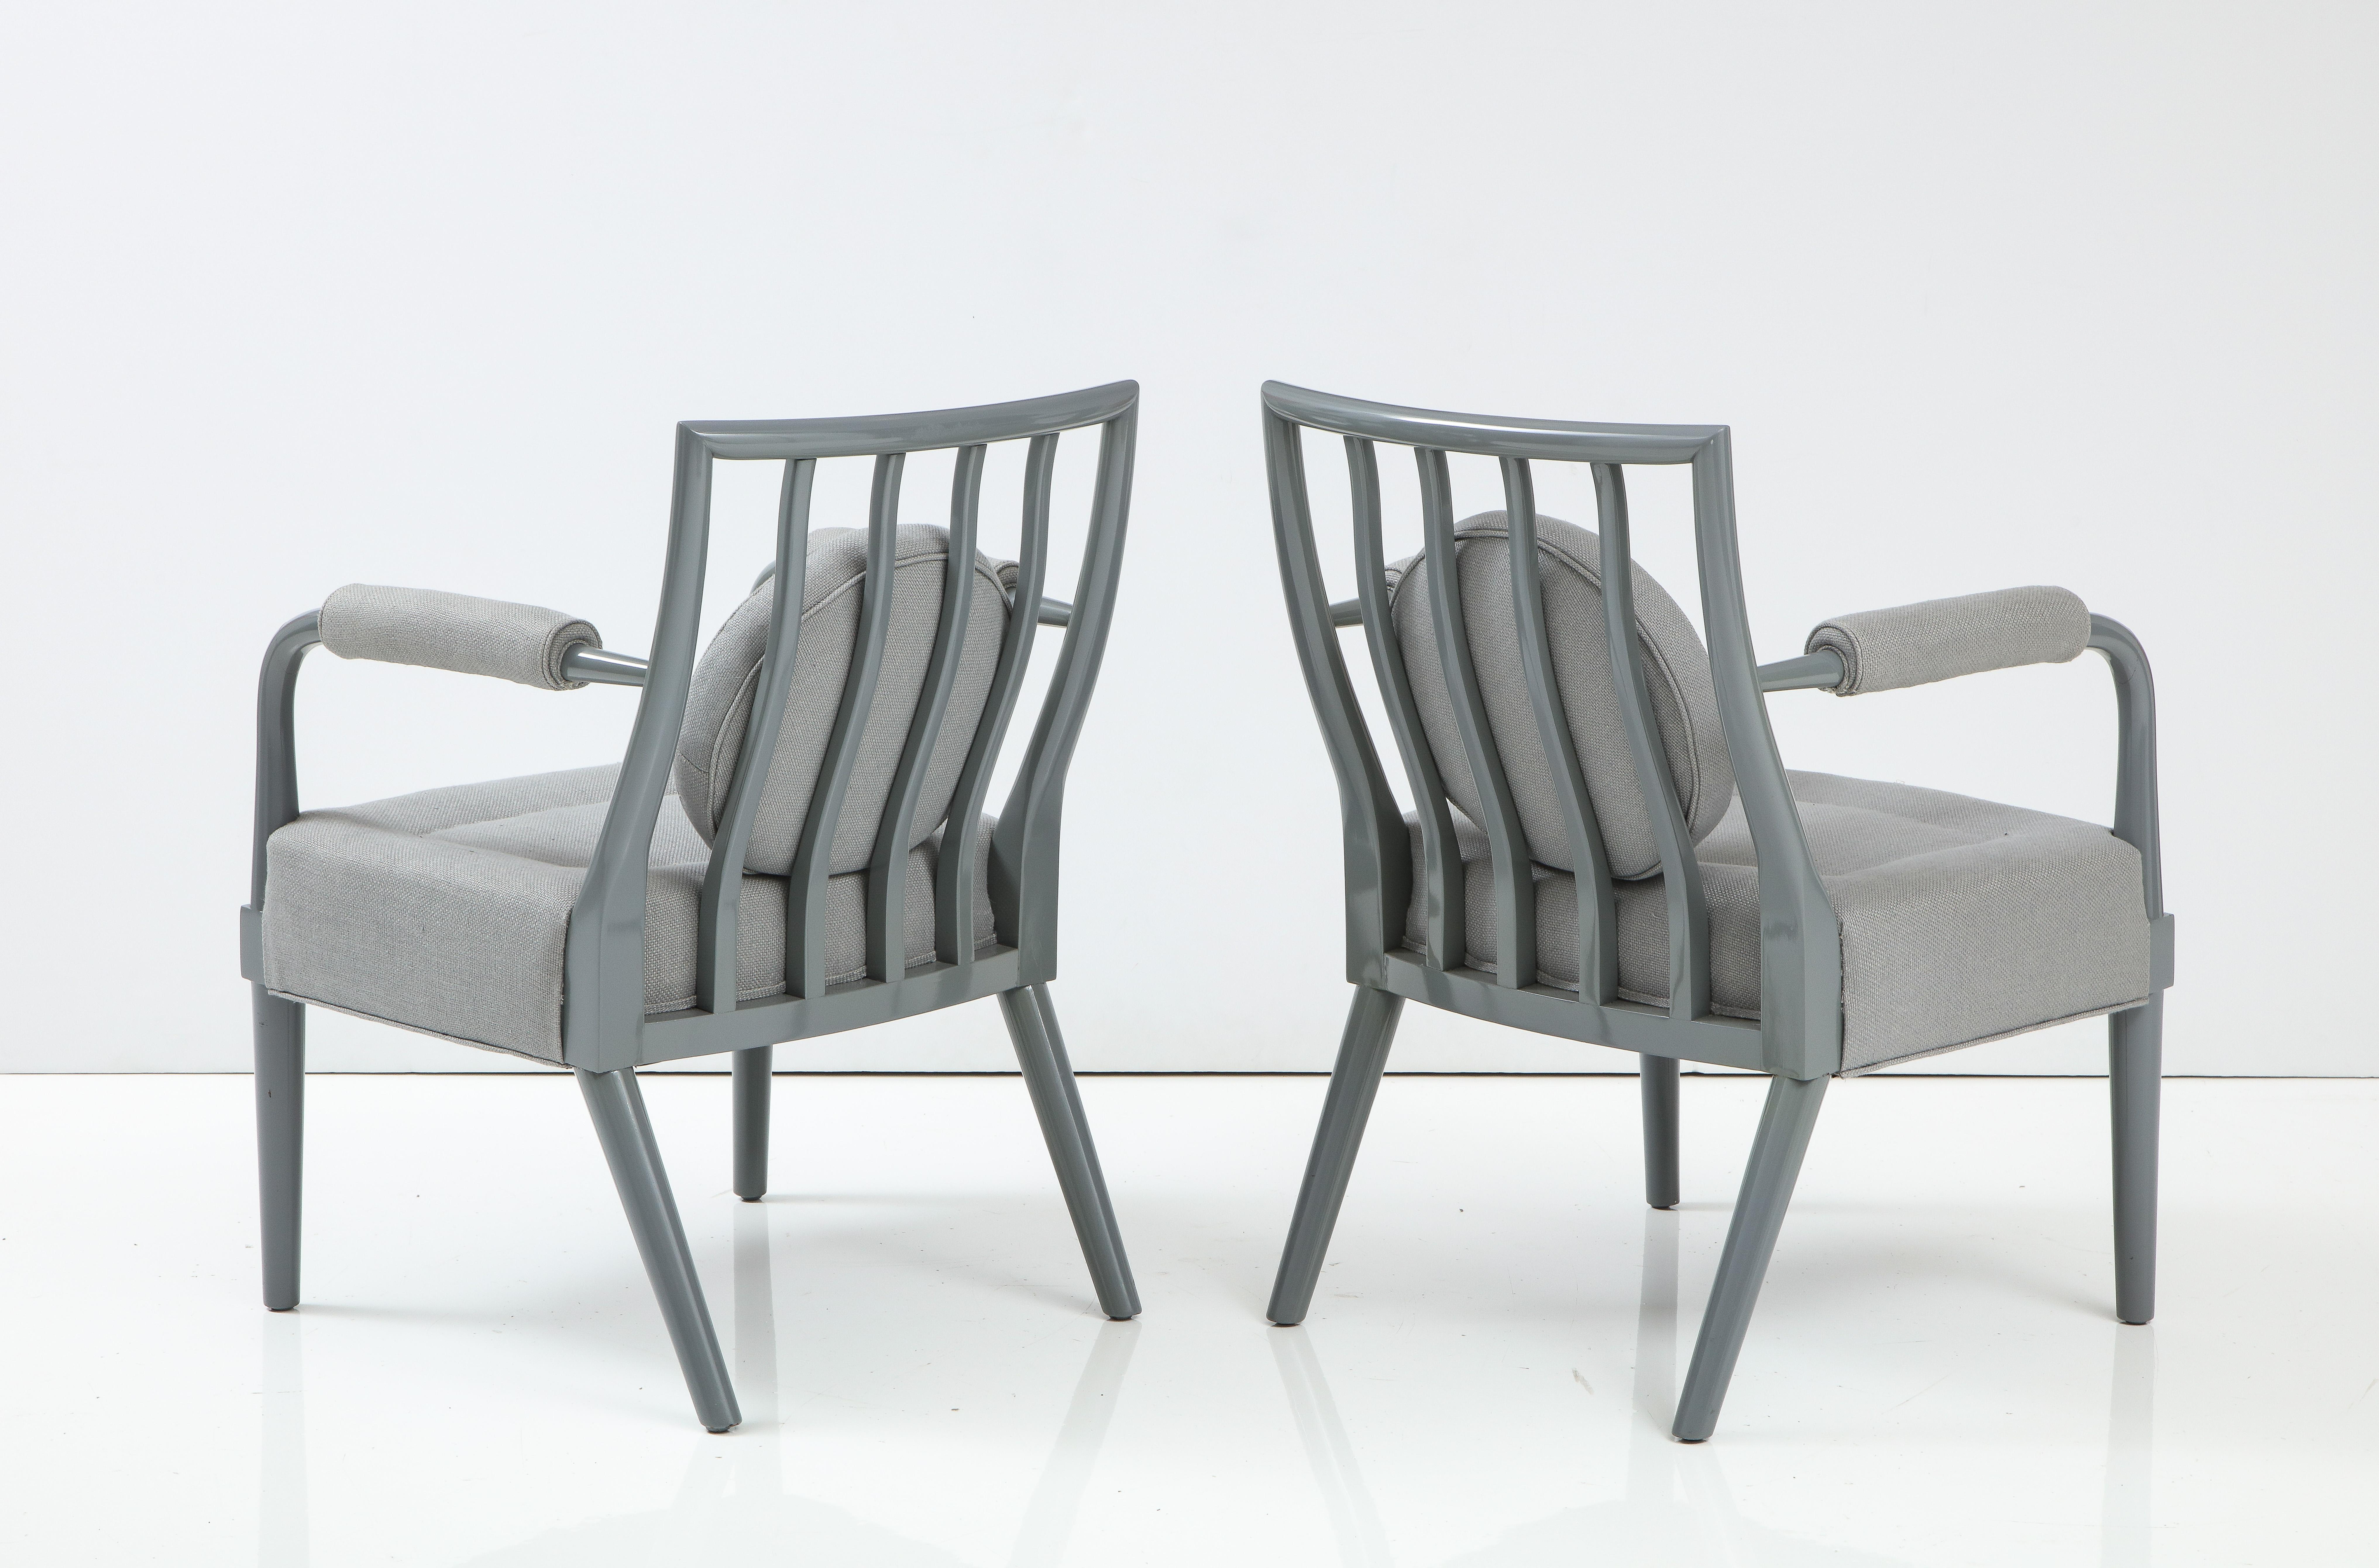 Pair of Armchairs by T.H. Robsjohn-Gibbings, United States, c. 1950 For Sale 1